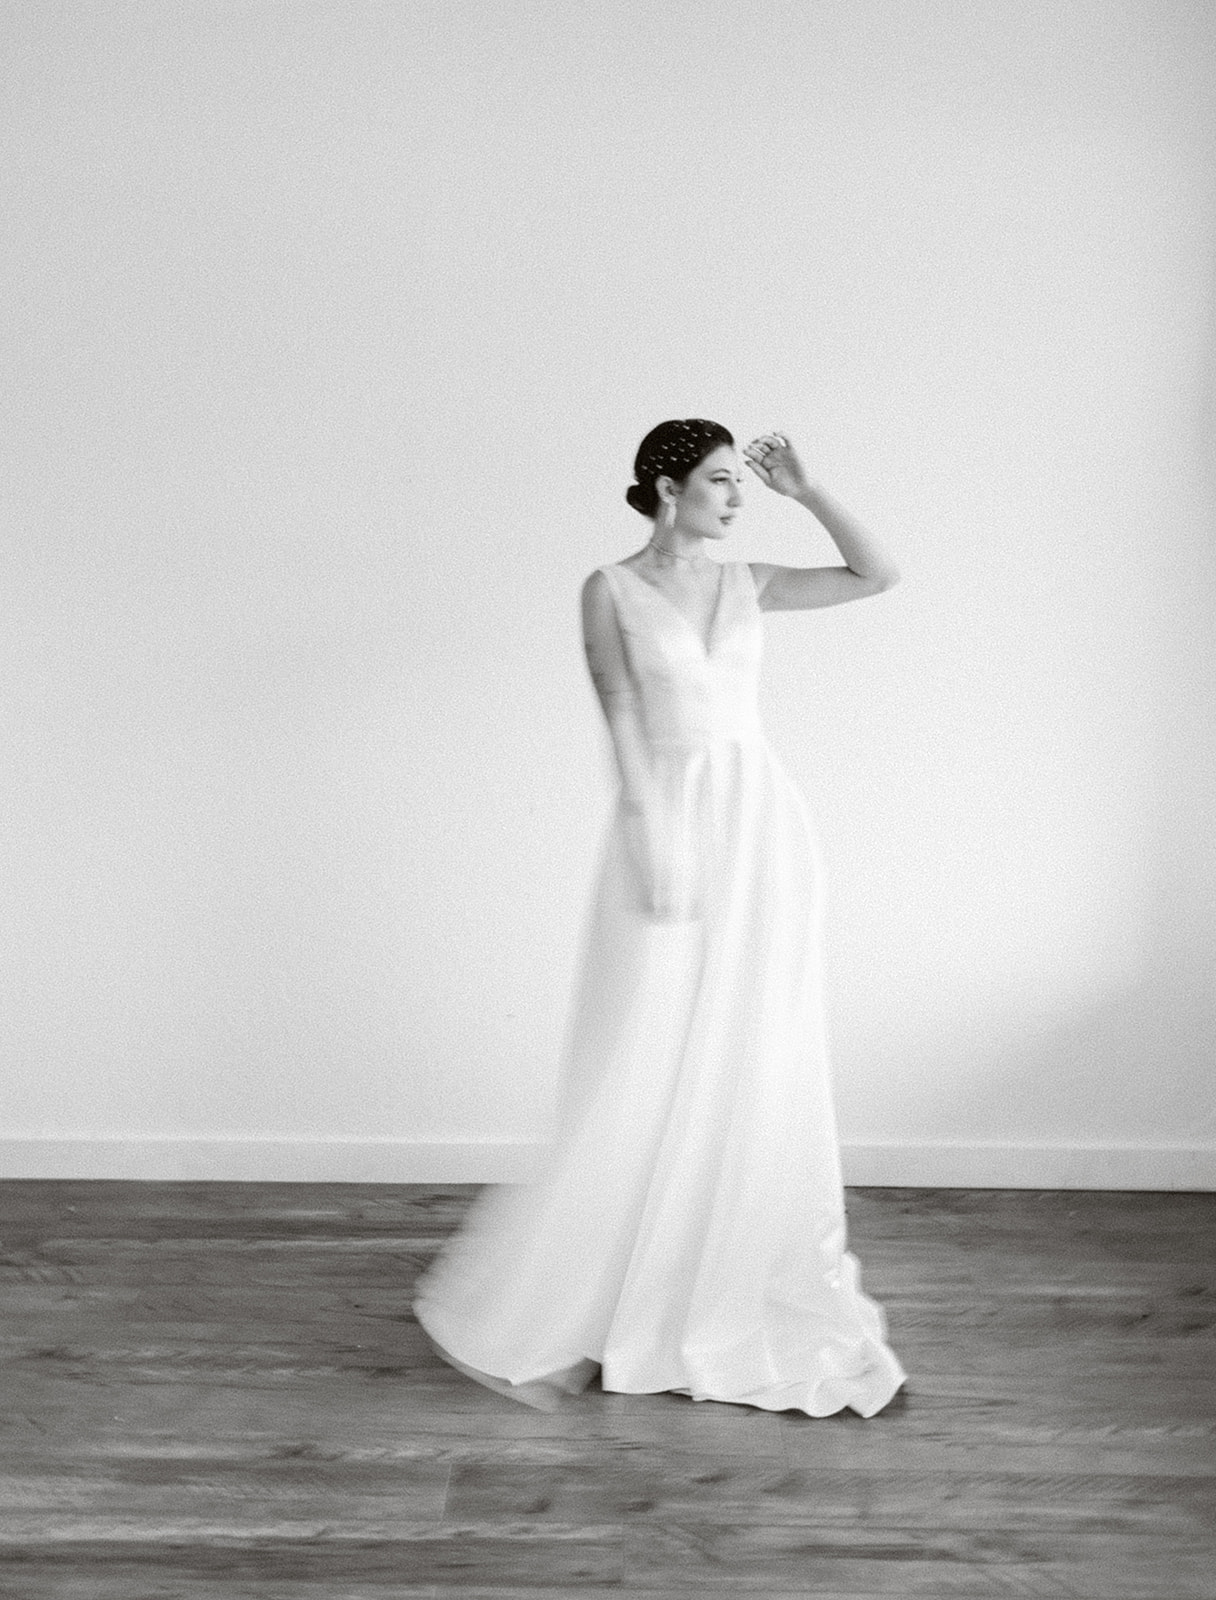 A bride in her modern gown moves in motion